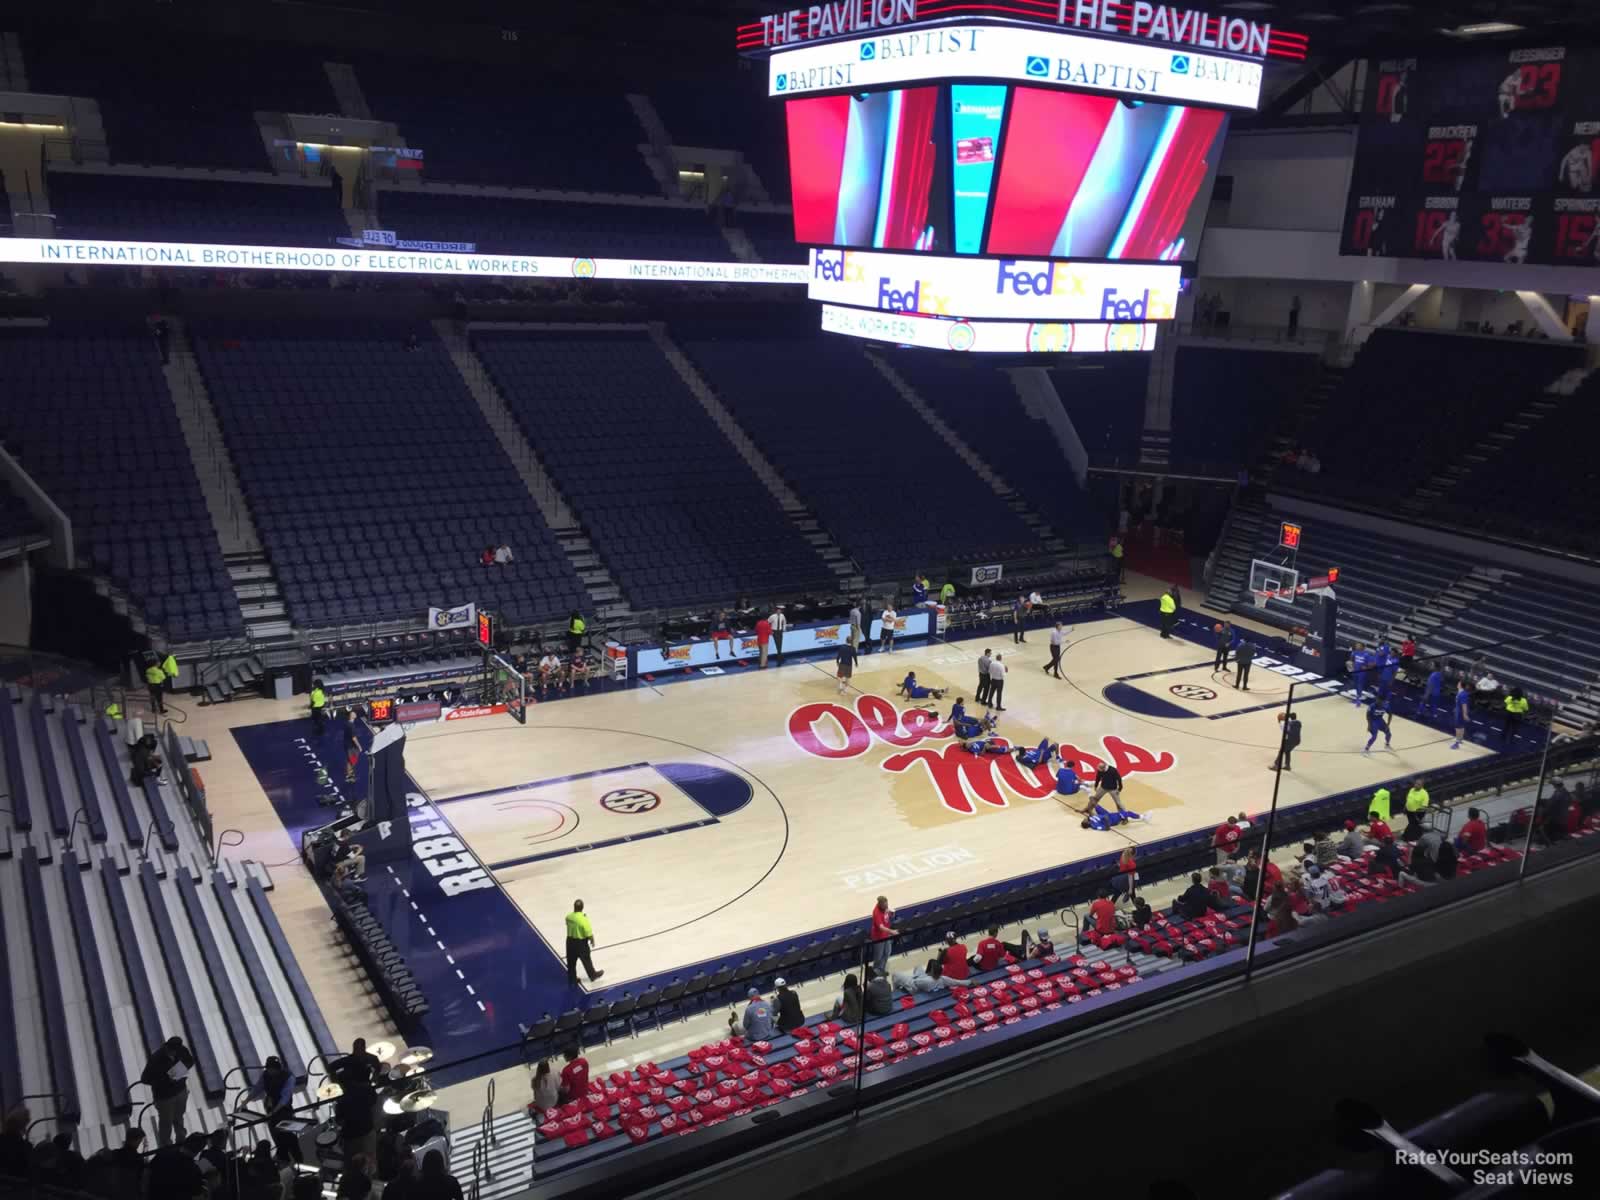 section 206, row 3 seat view  - pavilion at ole miss